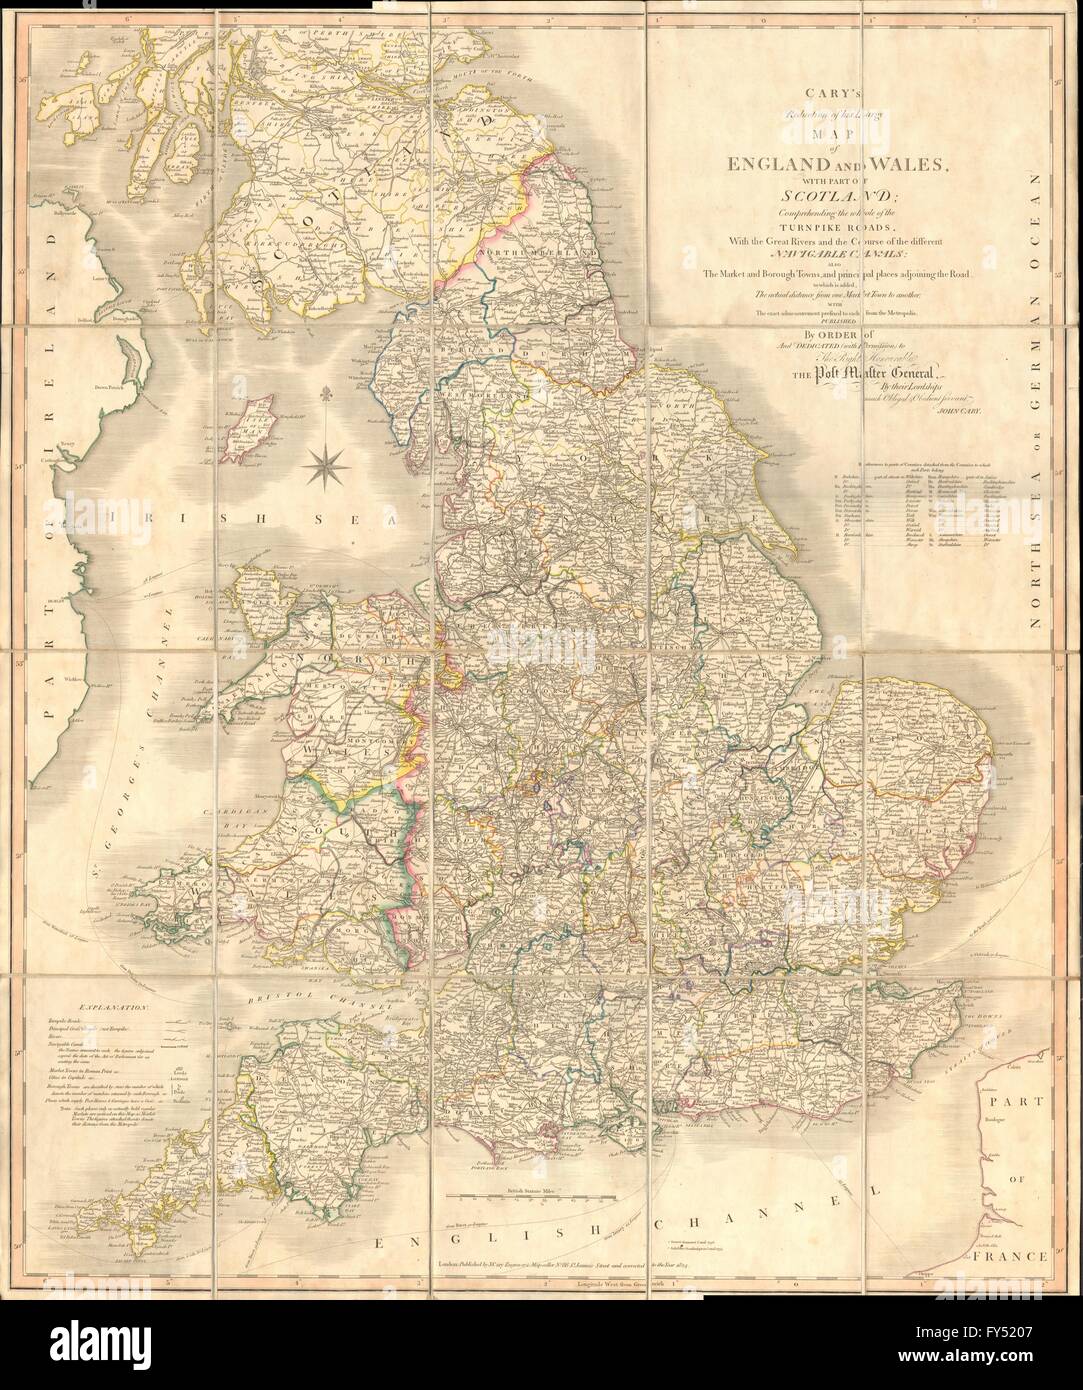 'Cary's reduction of his large map of England & Wales'. Turnpikes canals &c 1824 Stock Photo